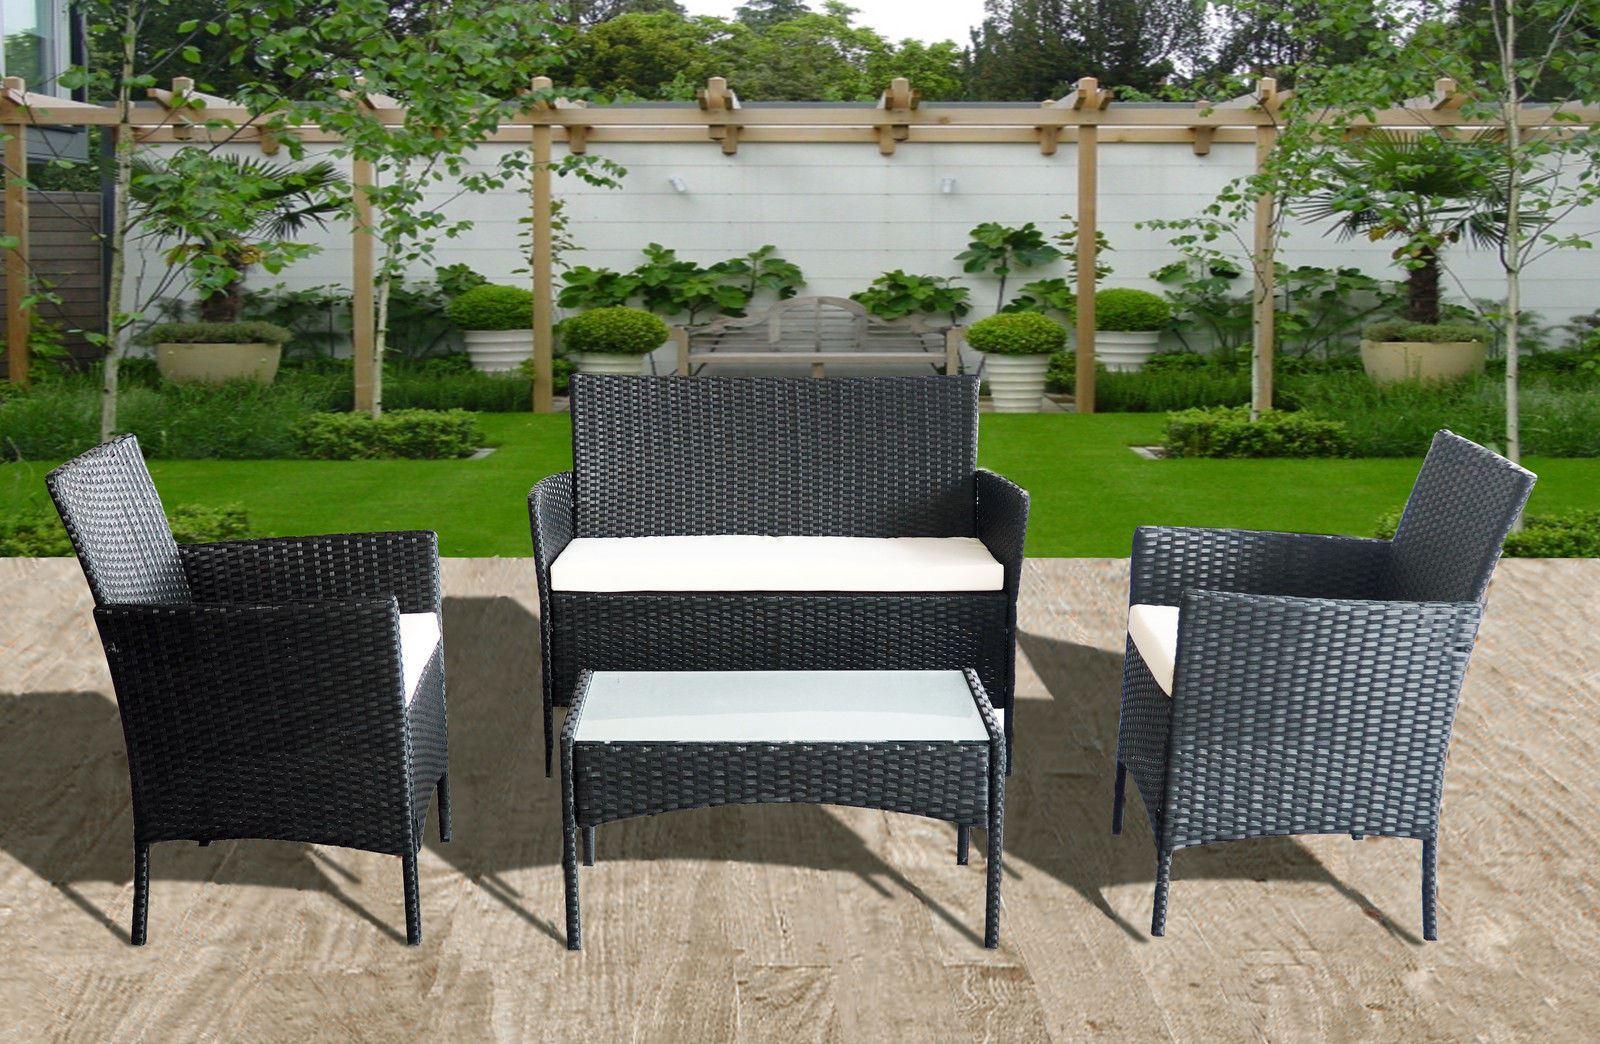 Rattan 4 Piece Set Outdoor Garden Patio Furniture With Table Sofa Chairs Bright Associates - Rattan Garden Patio Furniture Set